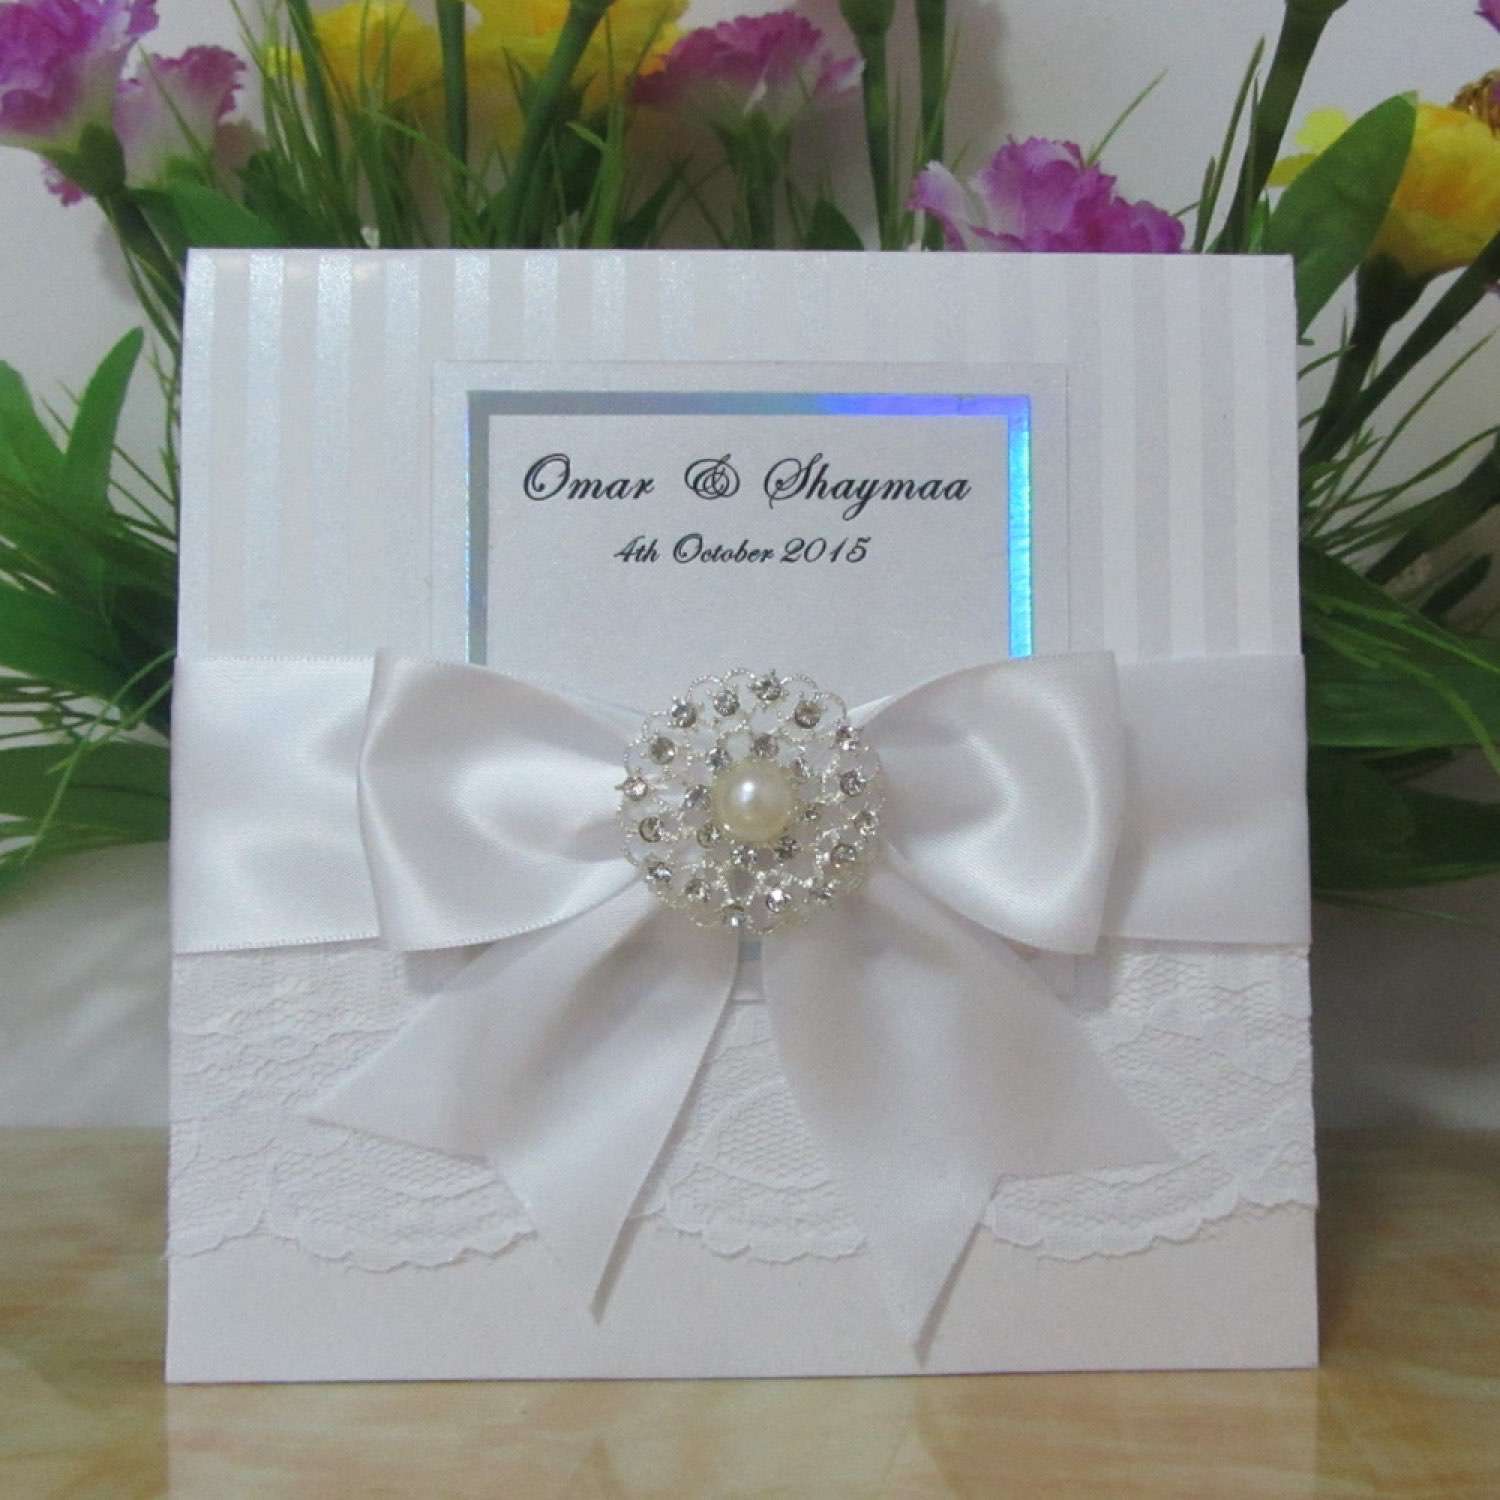 Lace Invitation Card with Ribbon Bow Wedding Invitation Made in China